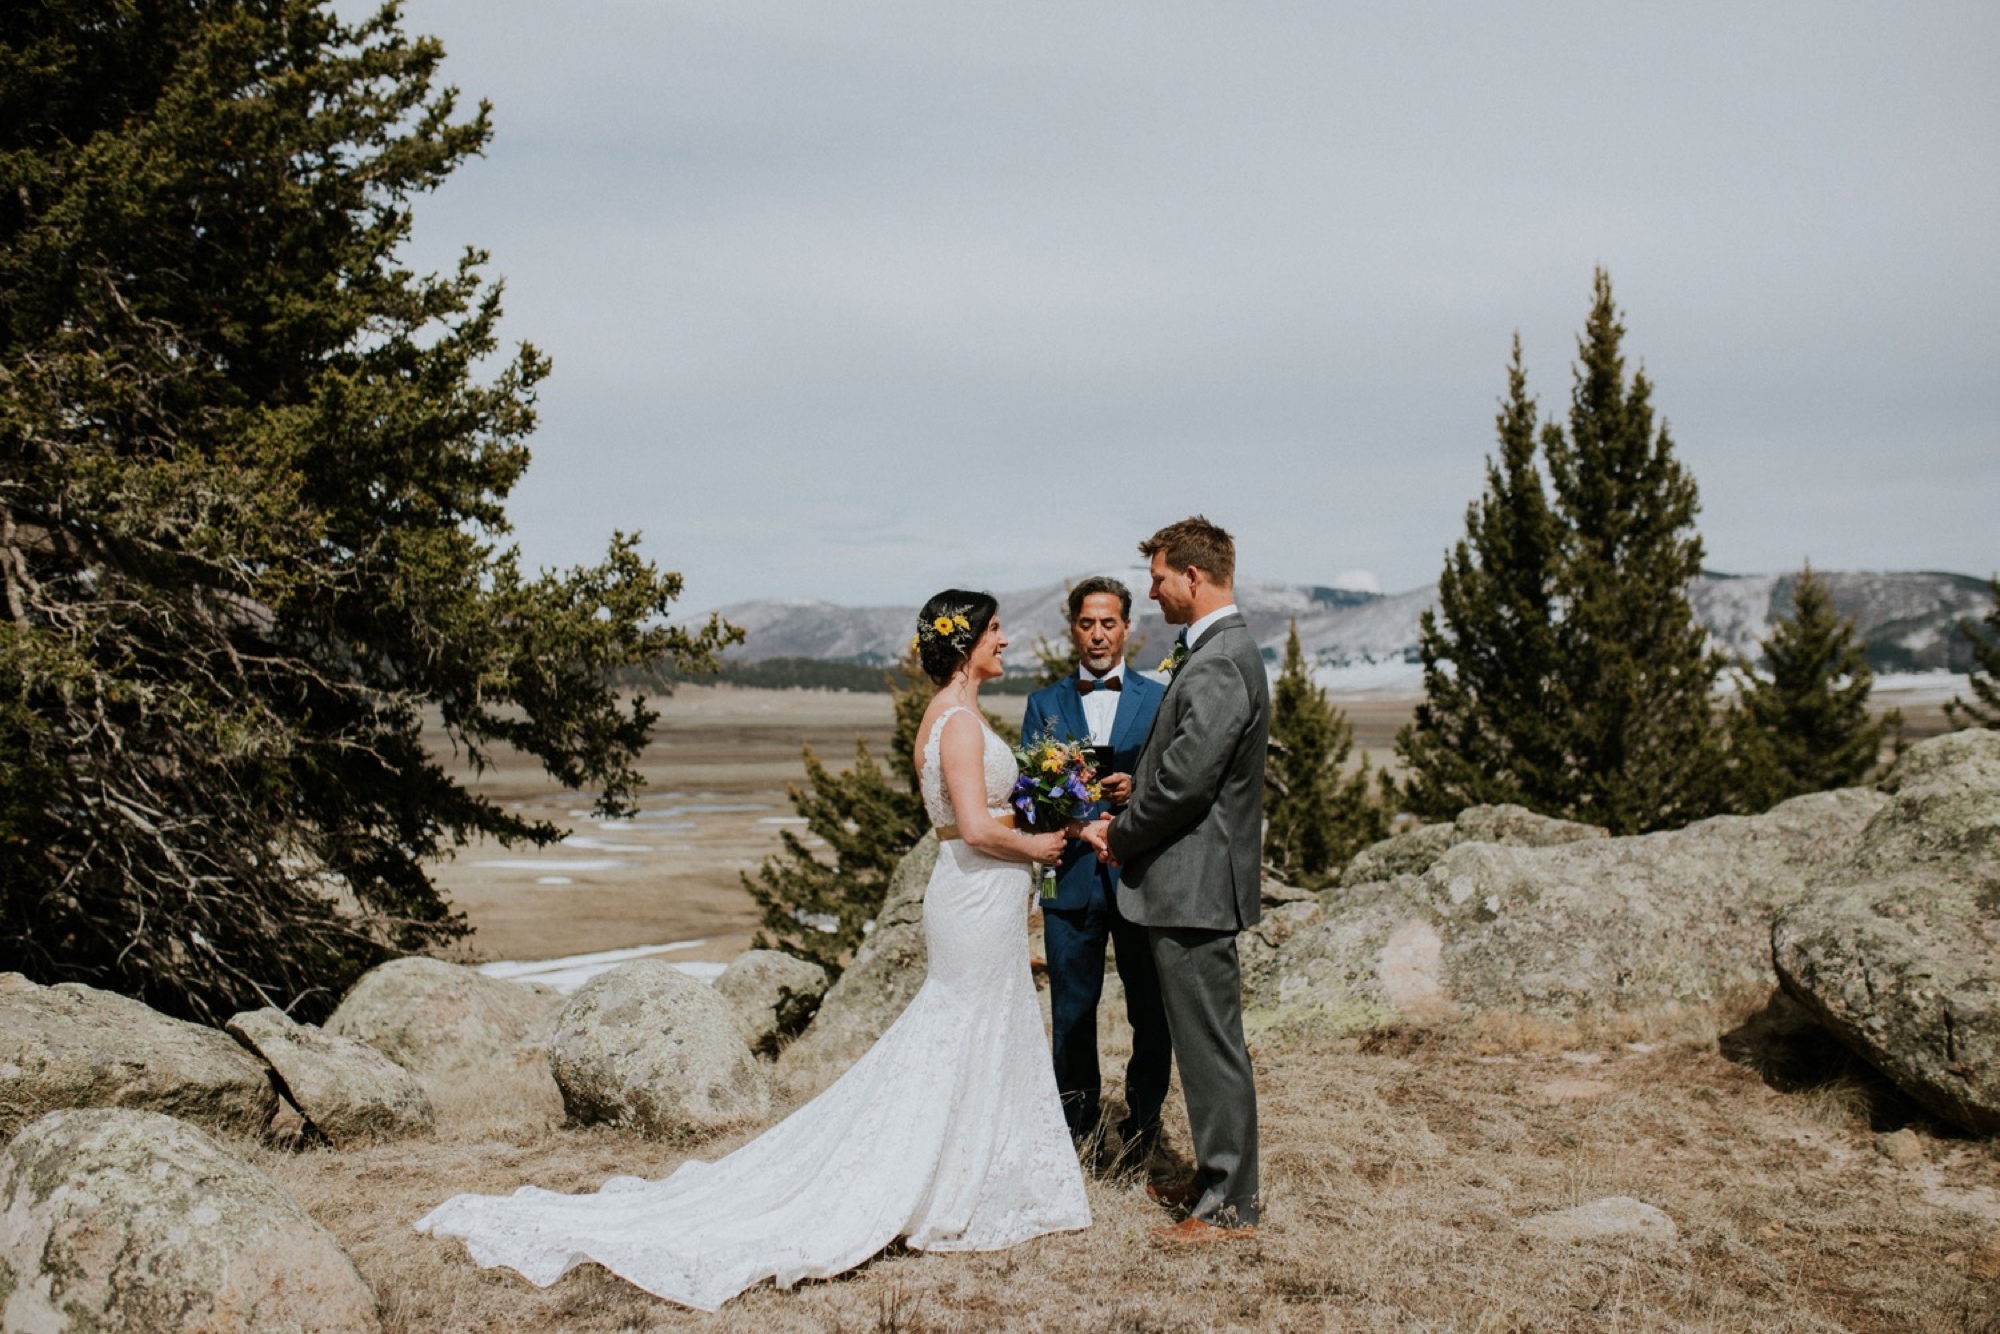  Traveling to Valles Caldera National Preserve outside of Jemez Springs, New Mexico to capture Lacey and Patrick’s New Mexico elopement was incredible! Their intimate ceremony overlooked the breathtaking landscape of Valles Caldera National Preserve 